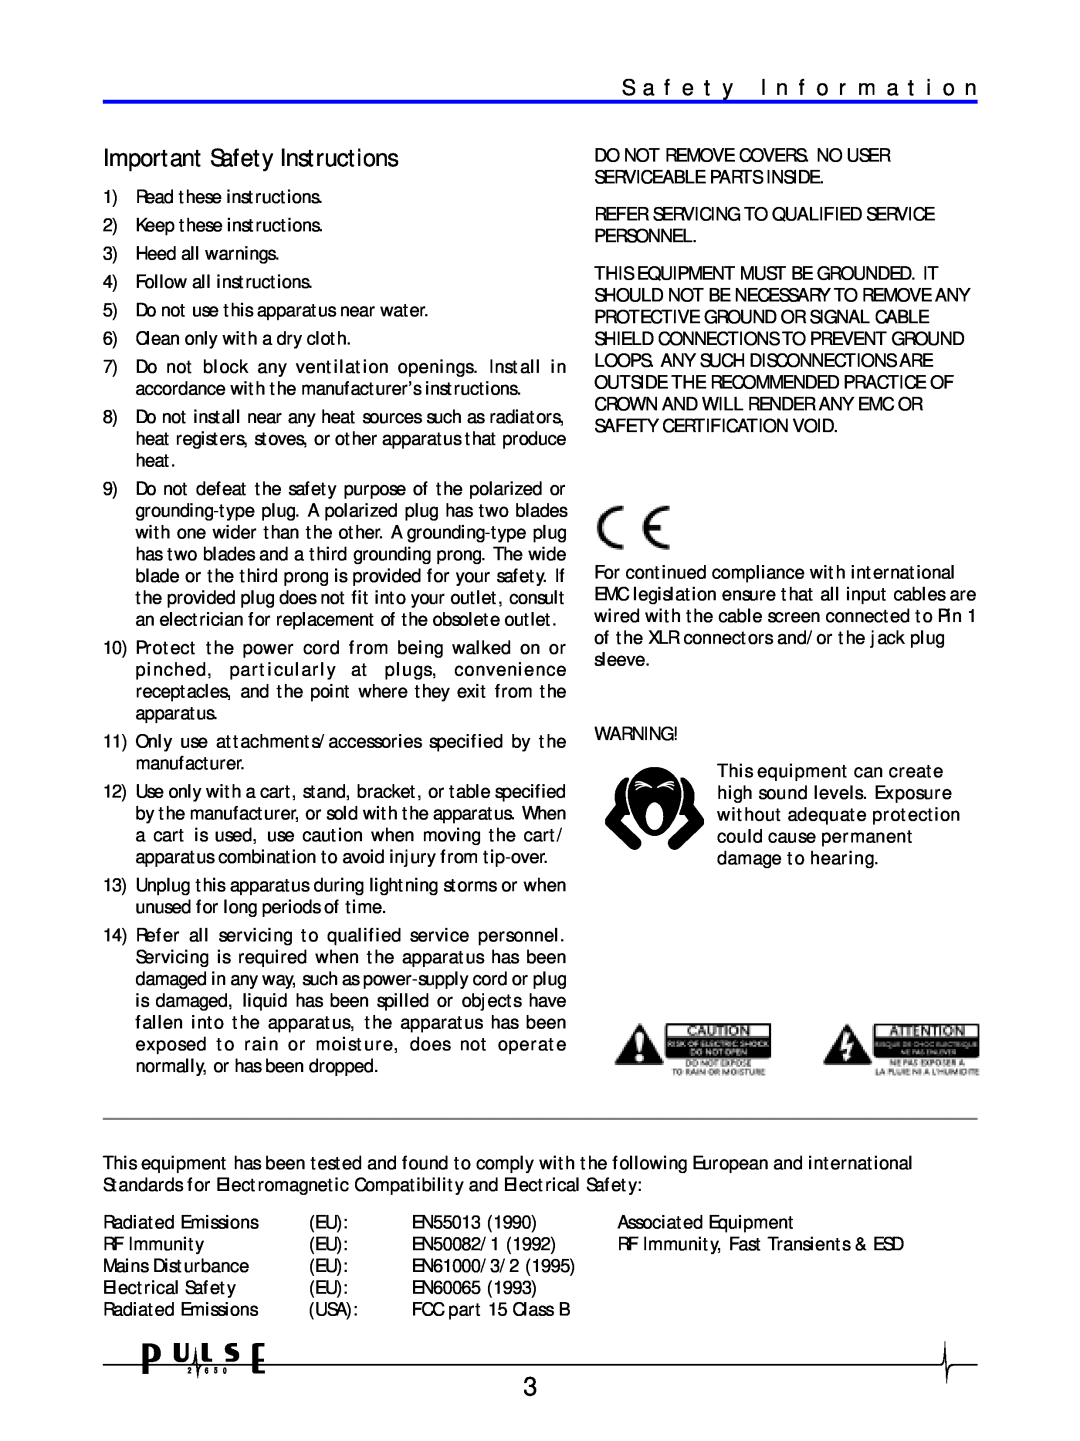 Crown Audio 2650 user manual S a f e t y I n f o r m a t i o n, Important Safety Instructions 